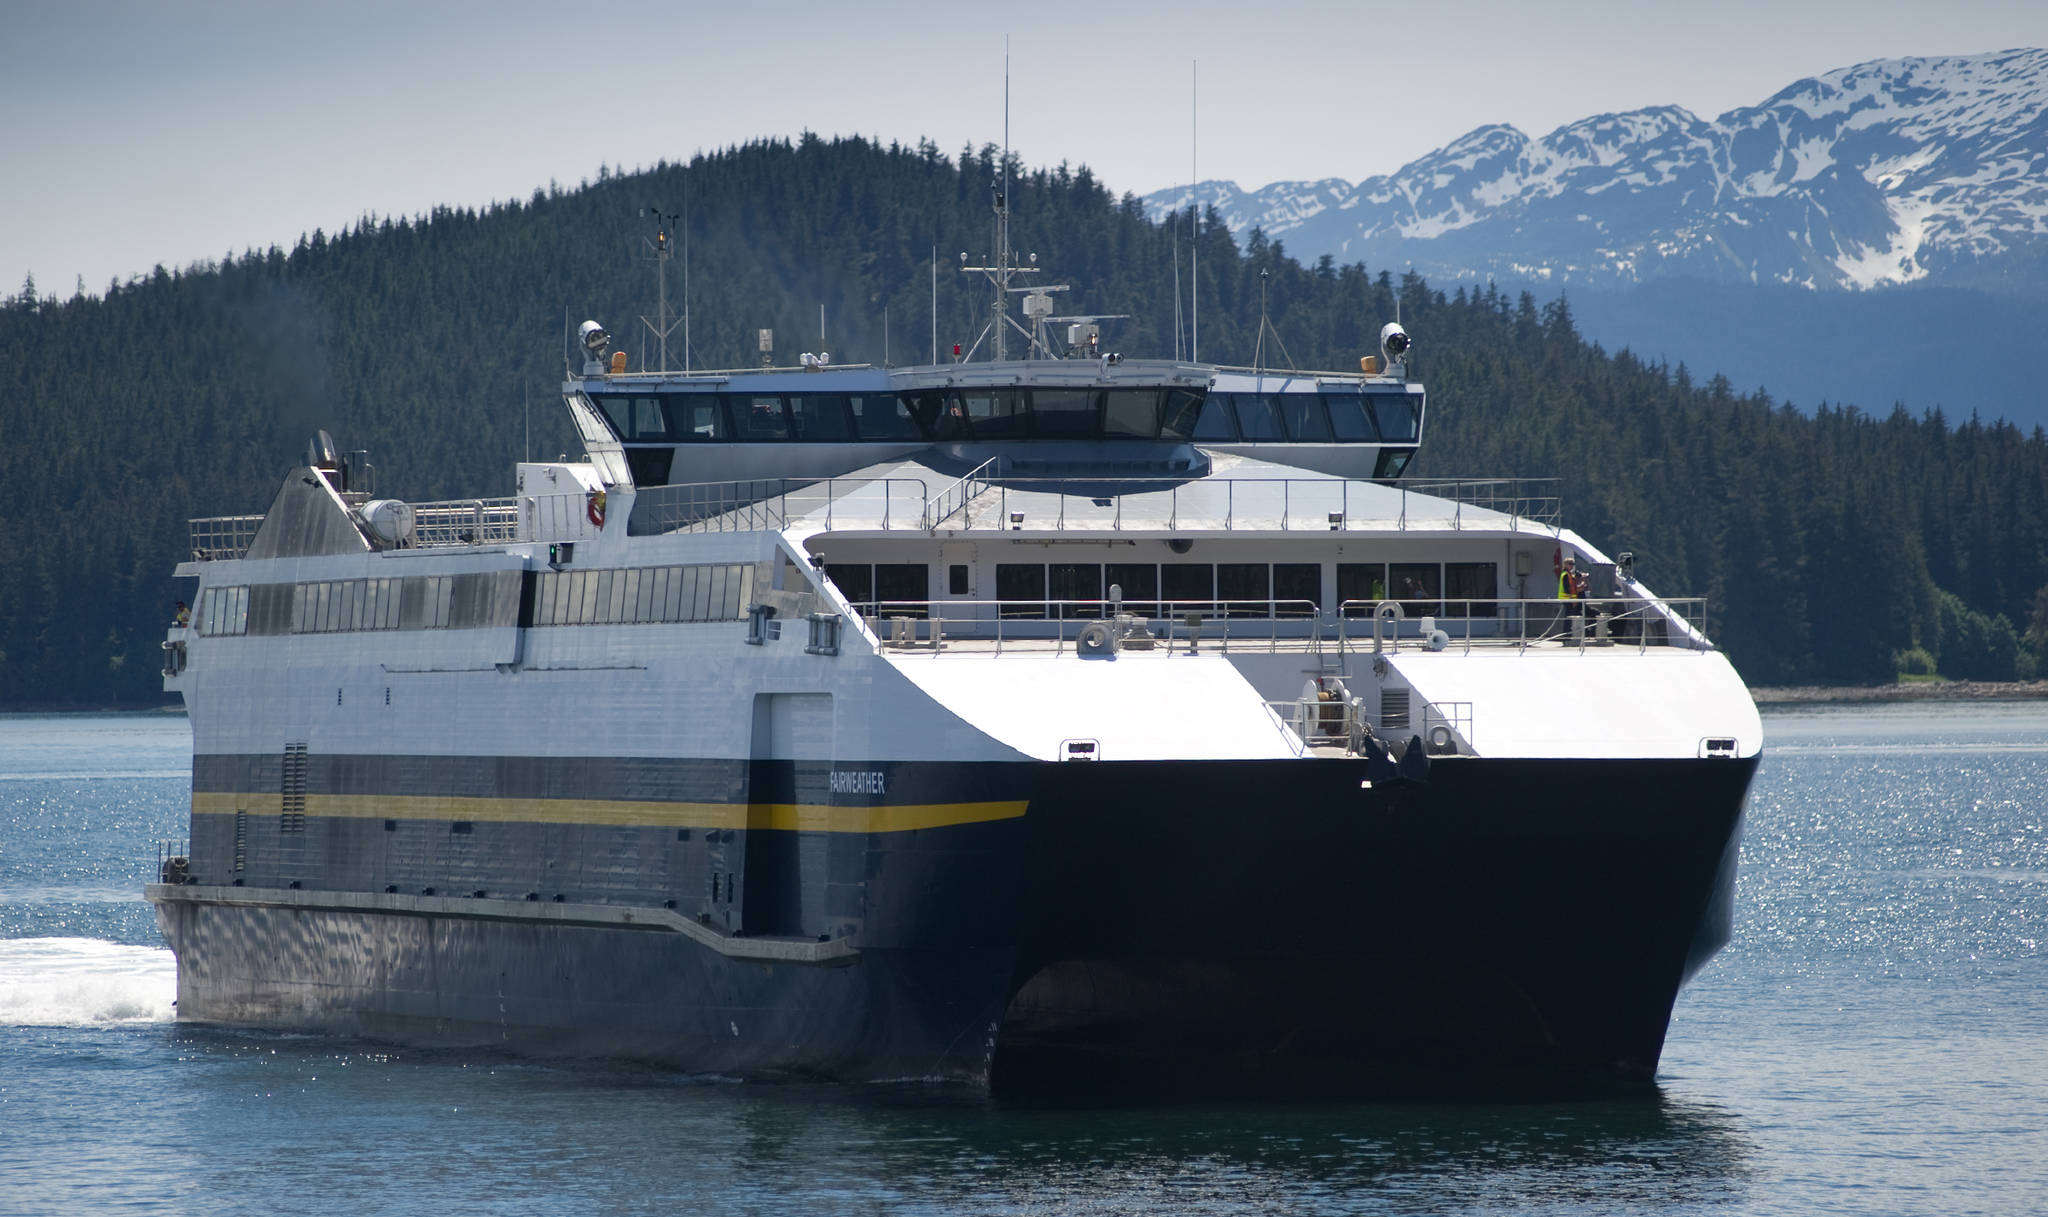 The Fairweather pulls up to the Auke Bay Terminal in June 2014.